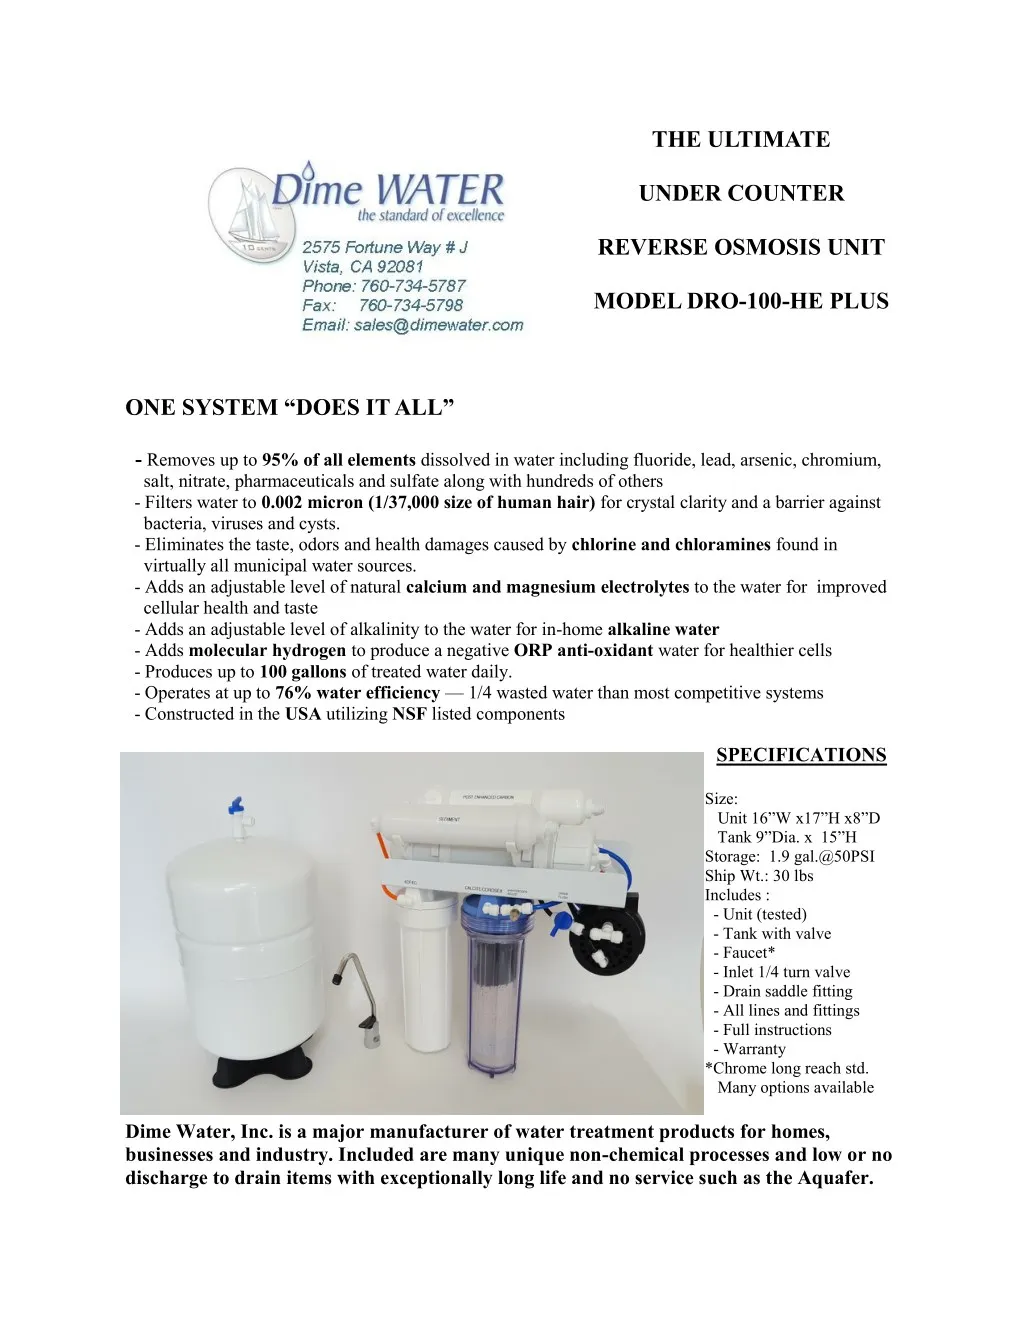 the ultimate under counter reverse osmosis unit